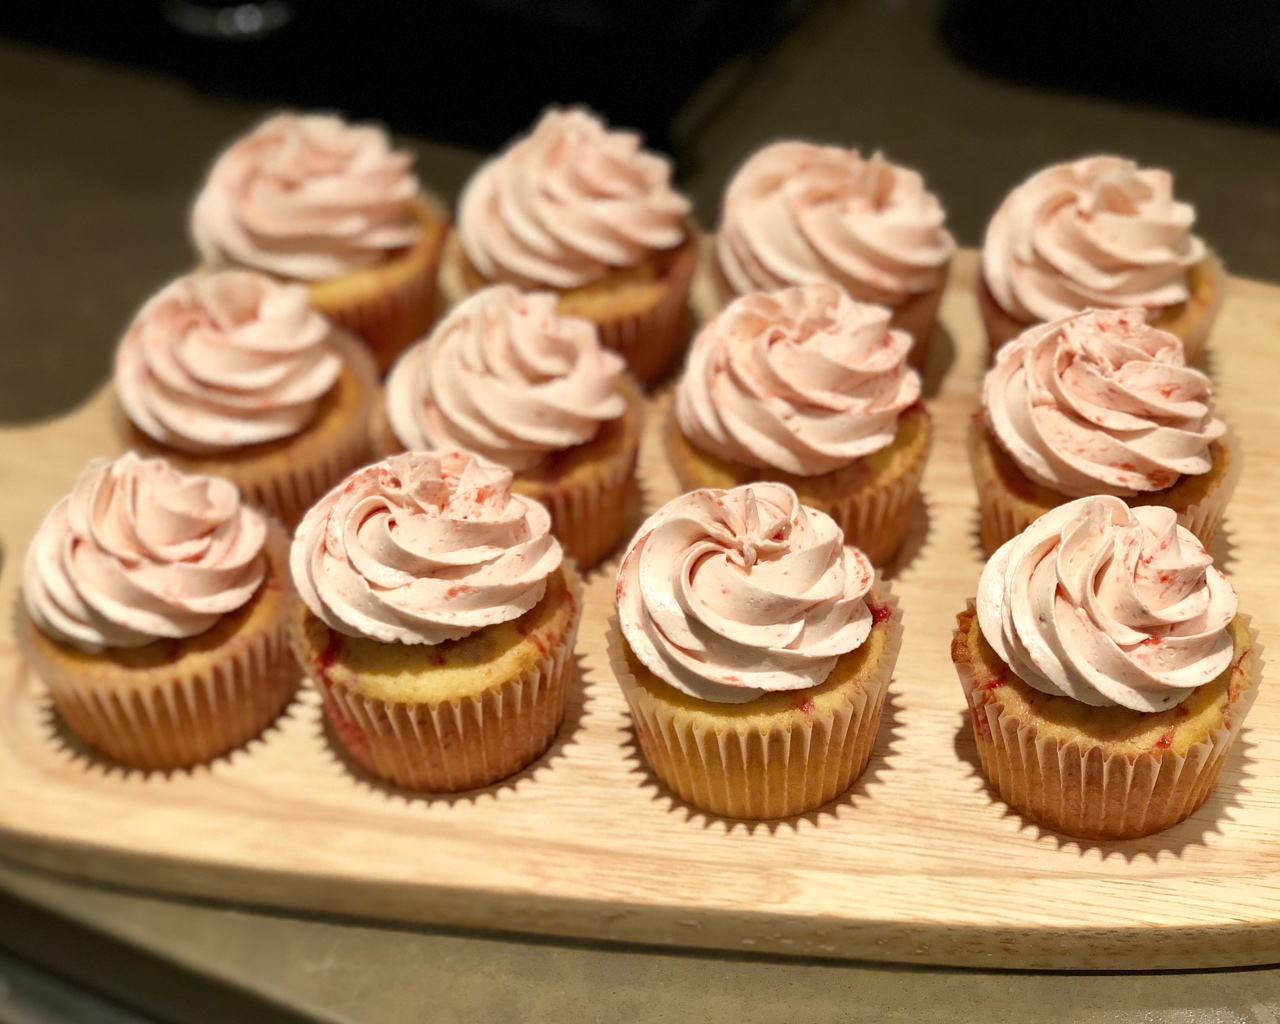 Strawberries and cream cupcakes 奶油草莓杯子蛋糕